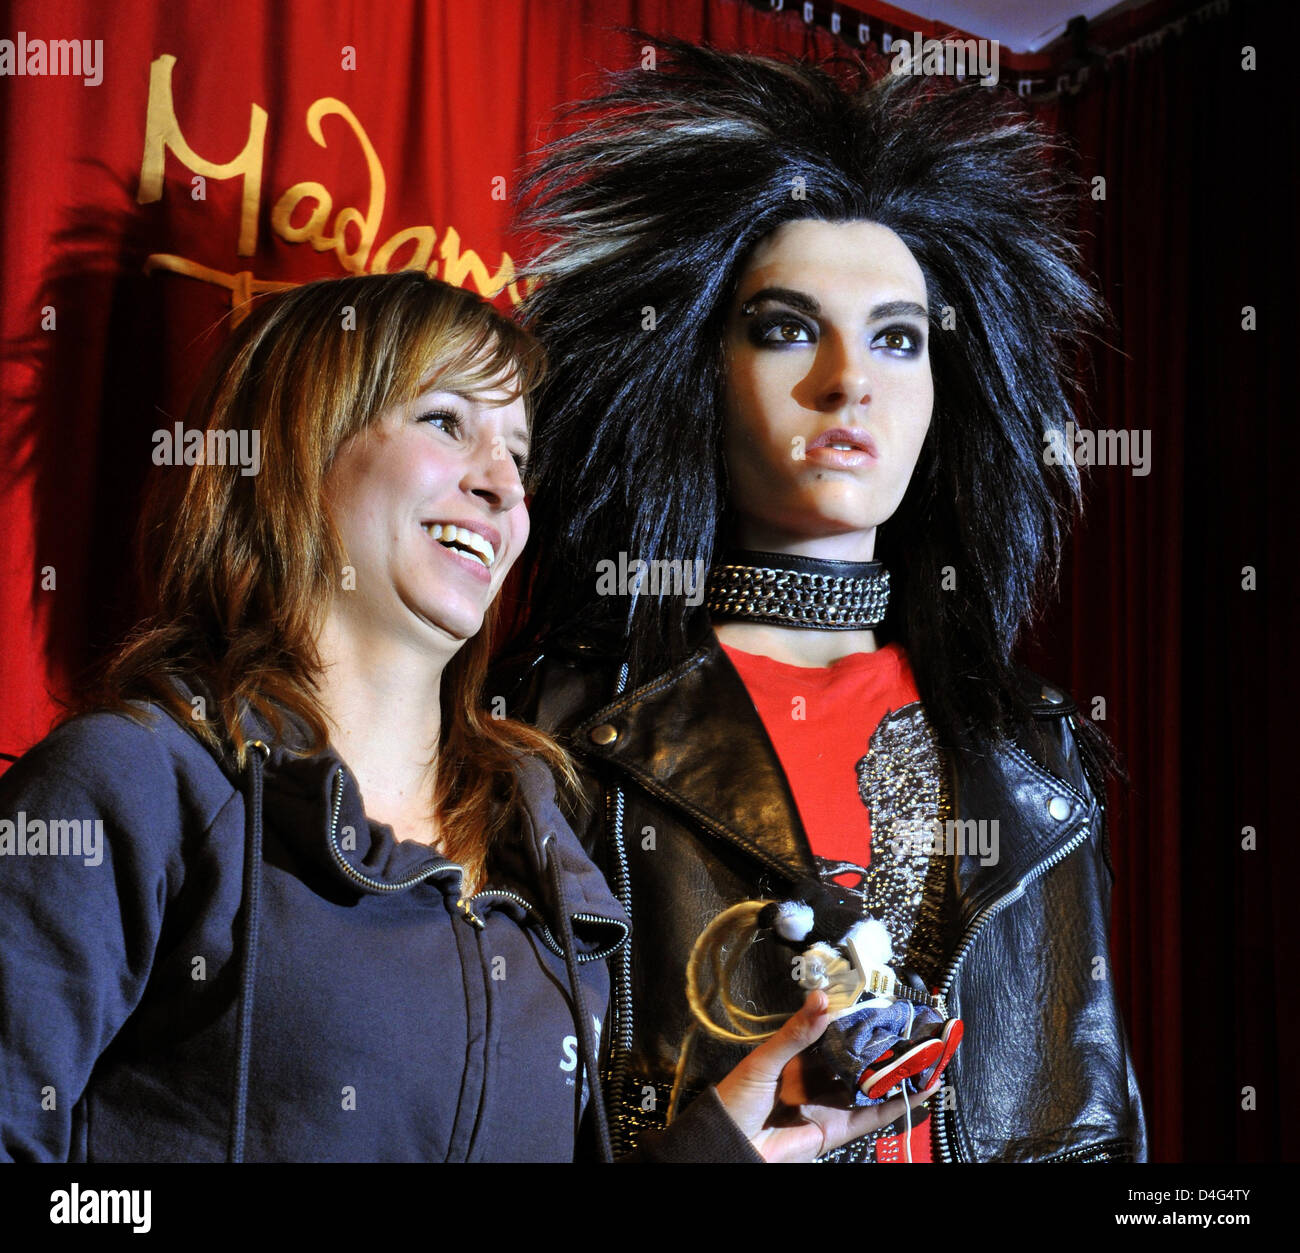 A female fan poses with the waxwork of Bill Kaulitz (R), singer of German teenie rock band 'Tokio Hotel' is phiotographed at Madame Tussauds in Berlin, Germany, 30 September 2008. The 19-year-old is the youngest person ever to have a waxwork by Madame Tussauds. Photo: RAINER JENSEN Stock Photo